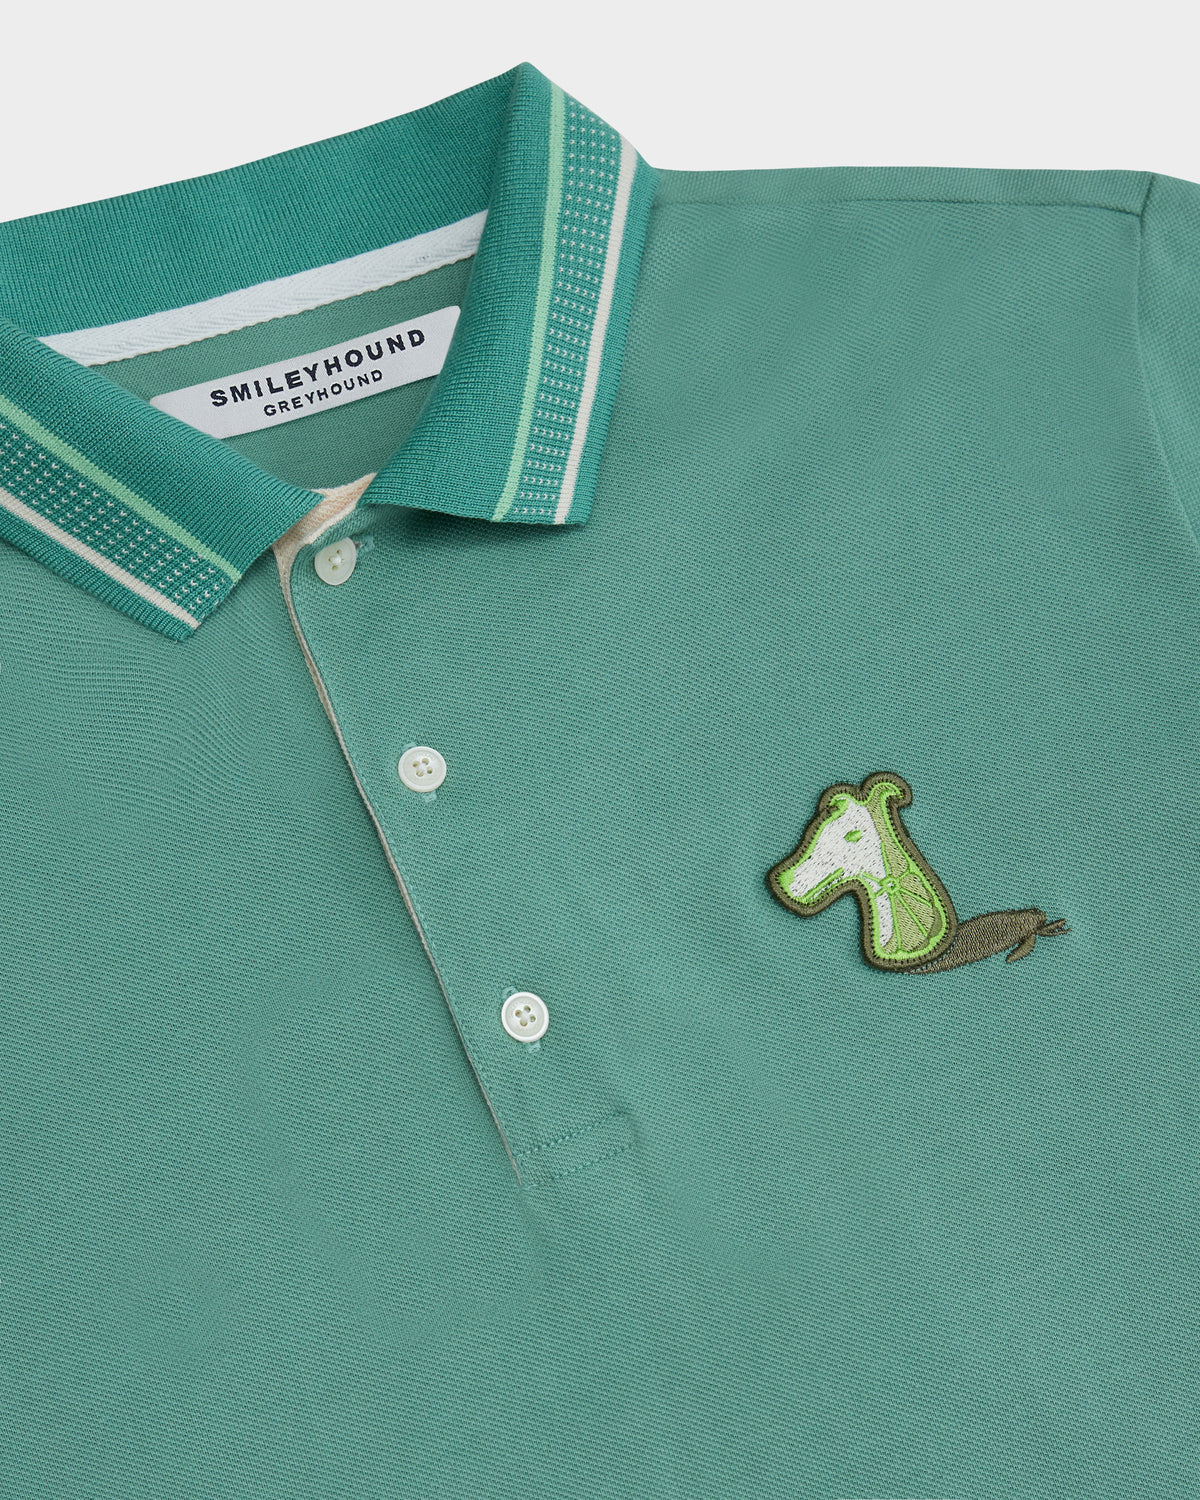 PIQUE POLO SHIRT WITH LOGO EMBROIDERED – SMILEYHOUND BY GREYHOUND